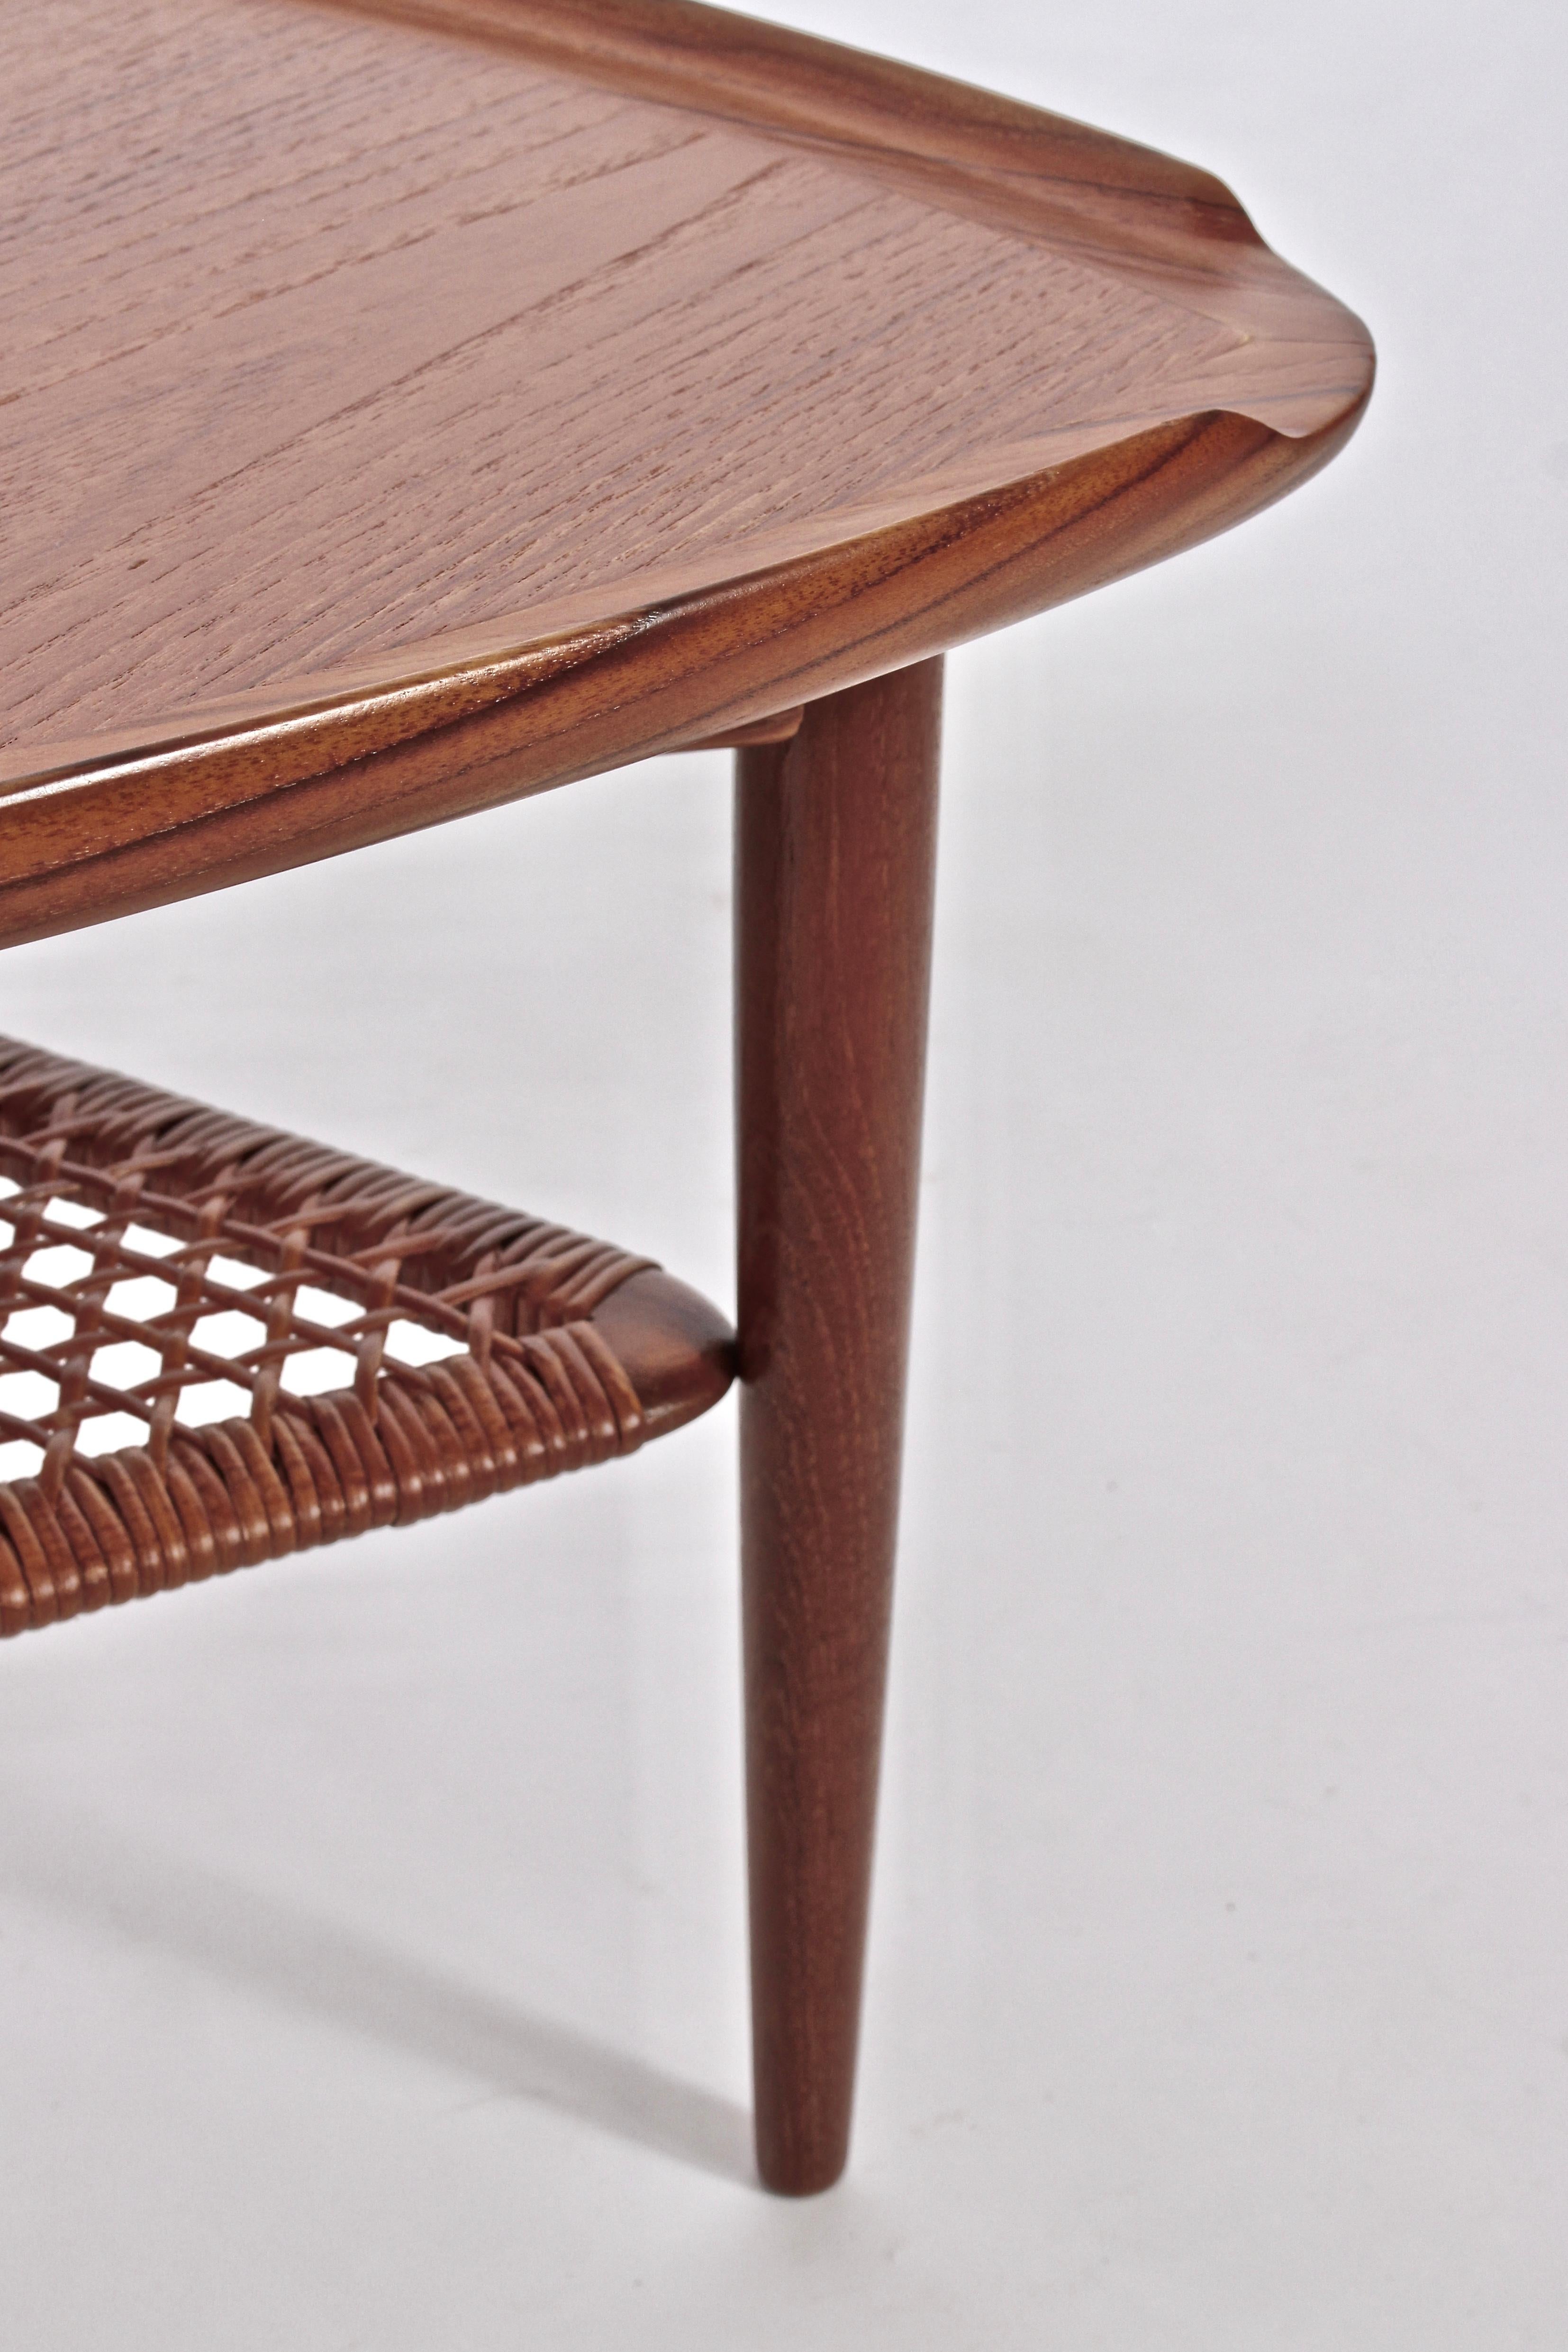 Poul Jensen for Selig Teak Tripod Table with Woven Cane Shelf, 1960's For Sale 1